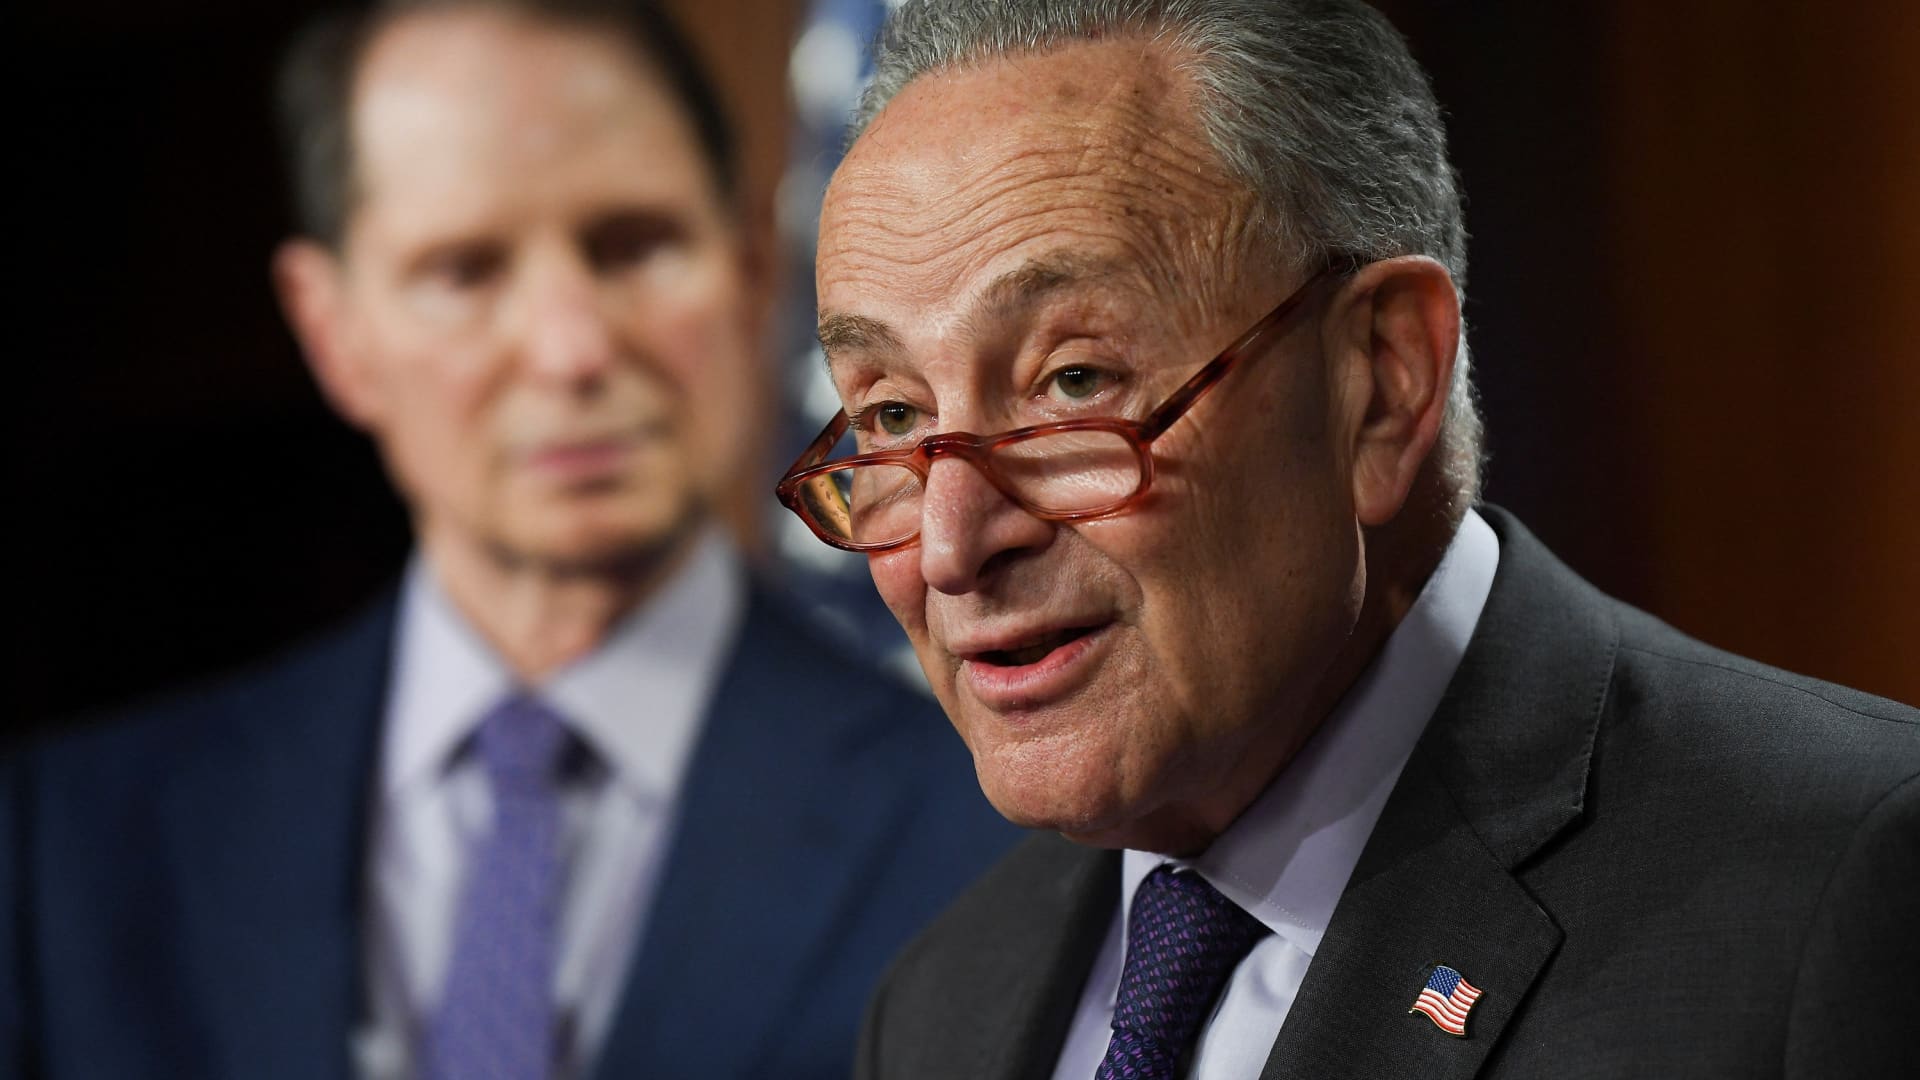 Chuck Schumer gives campaign donations from Silicon Valley Bank’s ex-CEO, PAC to charity